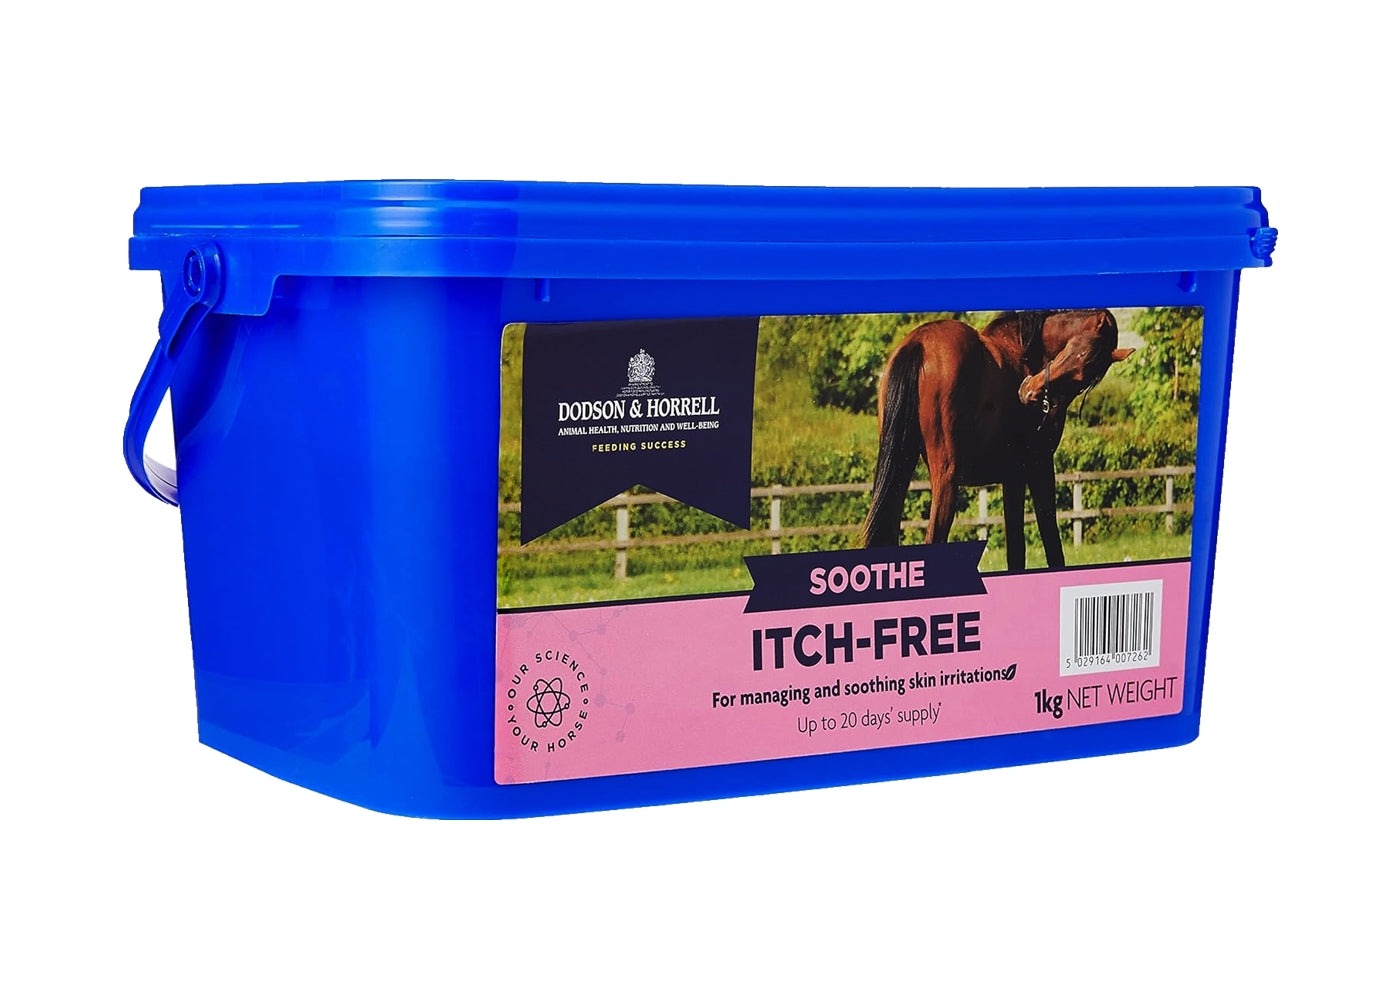 Dodson & Horrell - Itch-Free | Horse Care - Buy Online SPR Centre UK